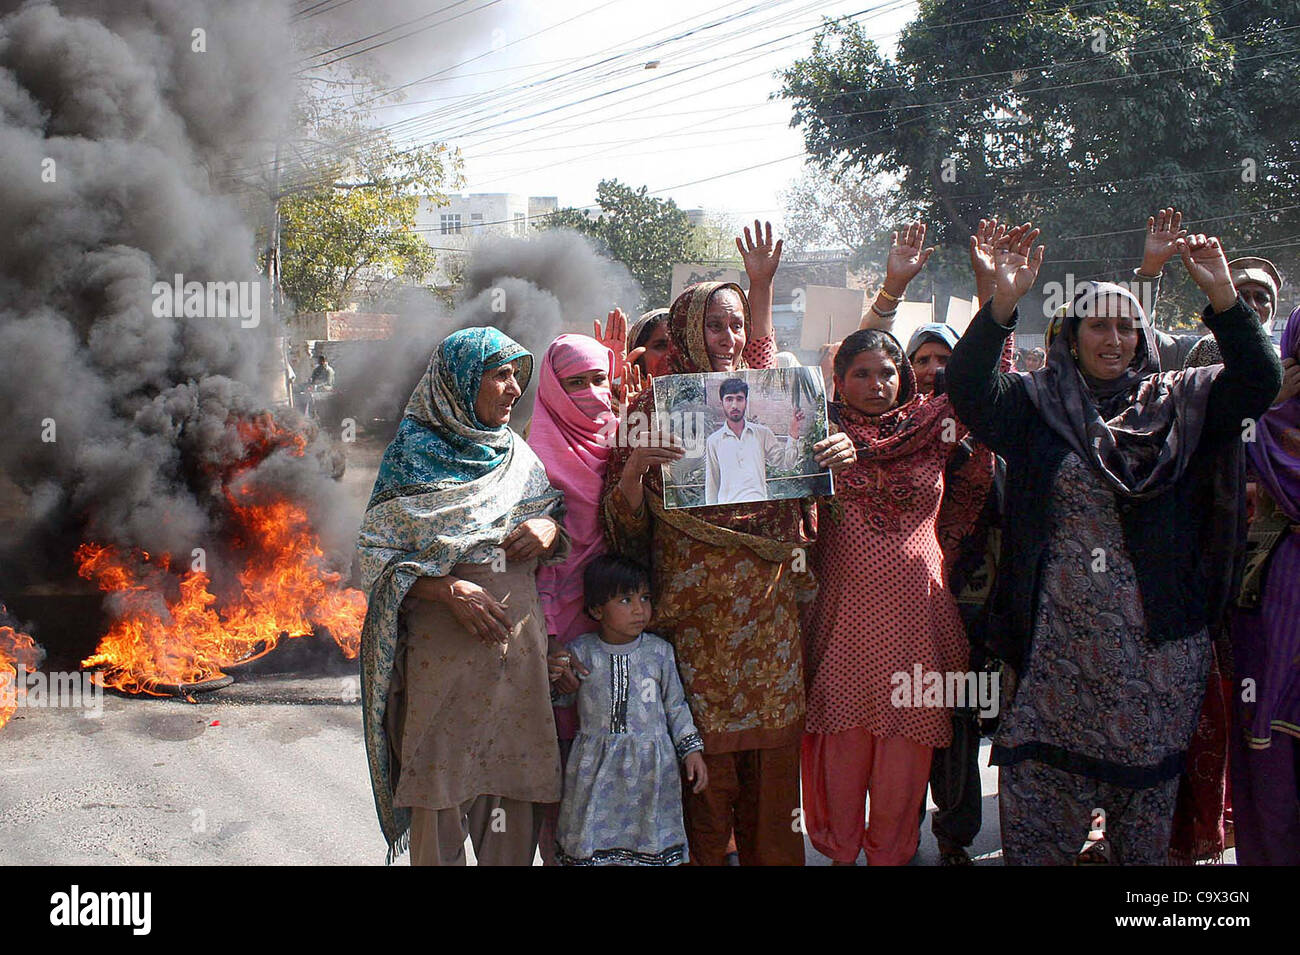 Women residents of Wazirabad Tehsil Gujranwala District gather near burning tyres as they are protesting against killing of Muhammad Shoaib, in Lahore on Monday, February 27, 2012. Stock Photo